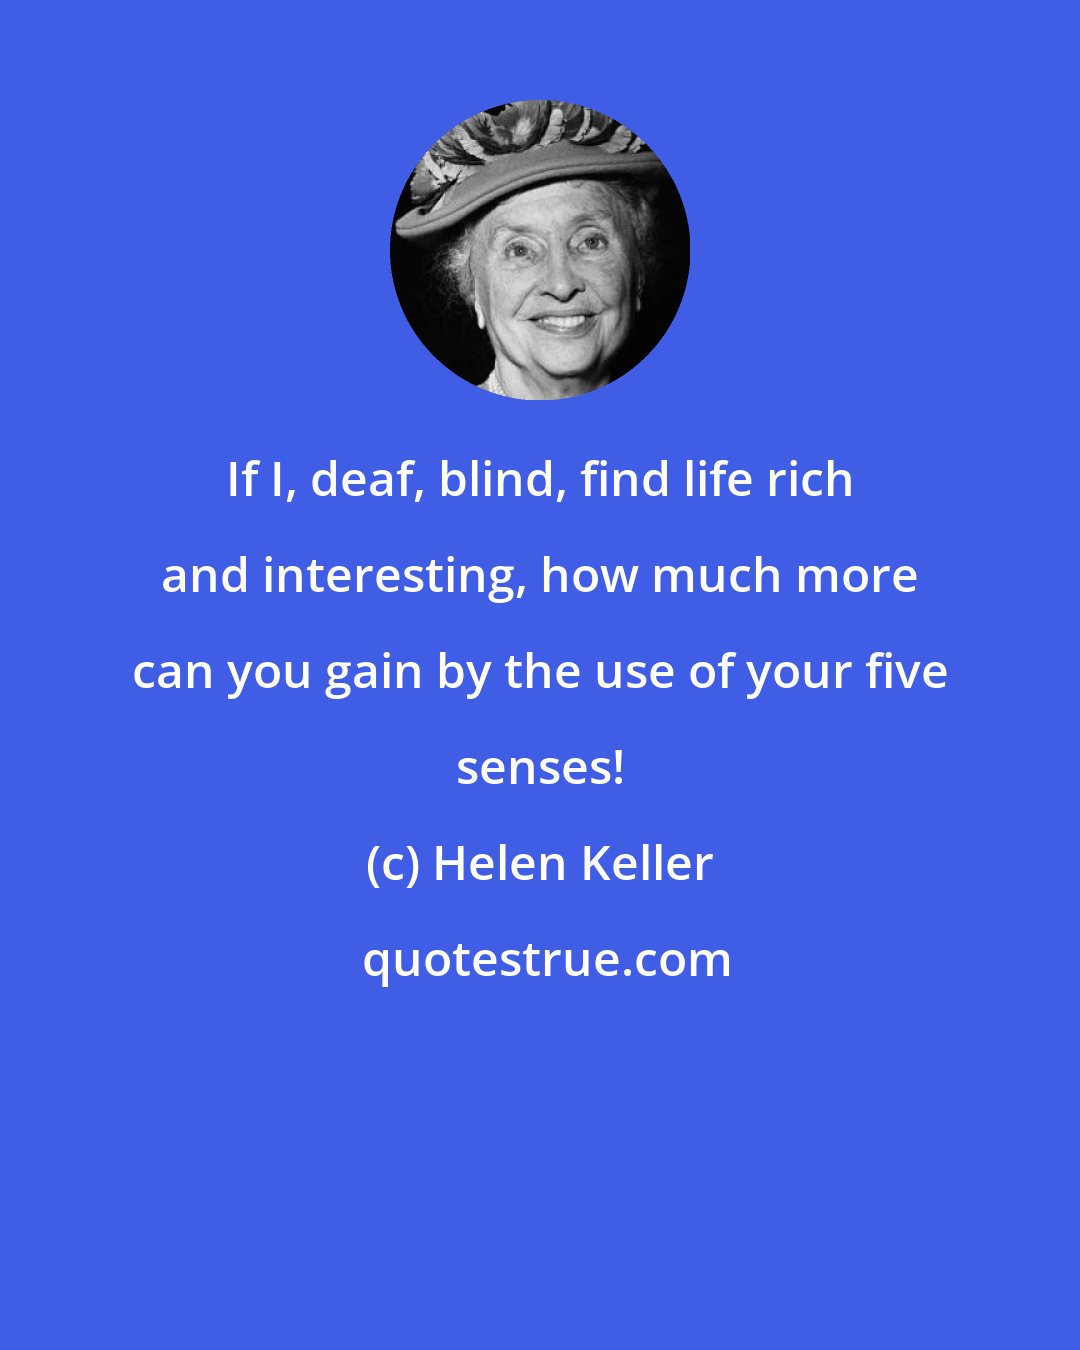 Helen Keller: If I, deaf, blind, find life rich and interesting, how much more can you gain by the use of your five senses!